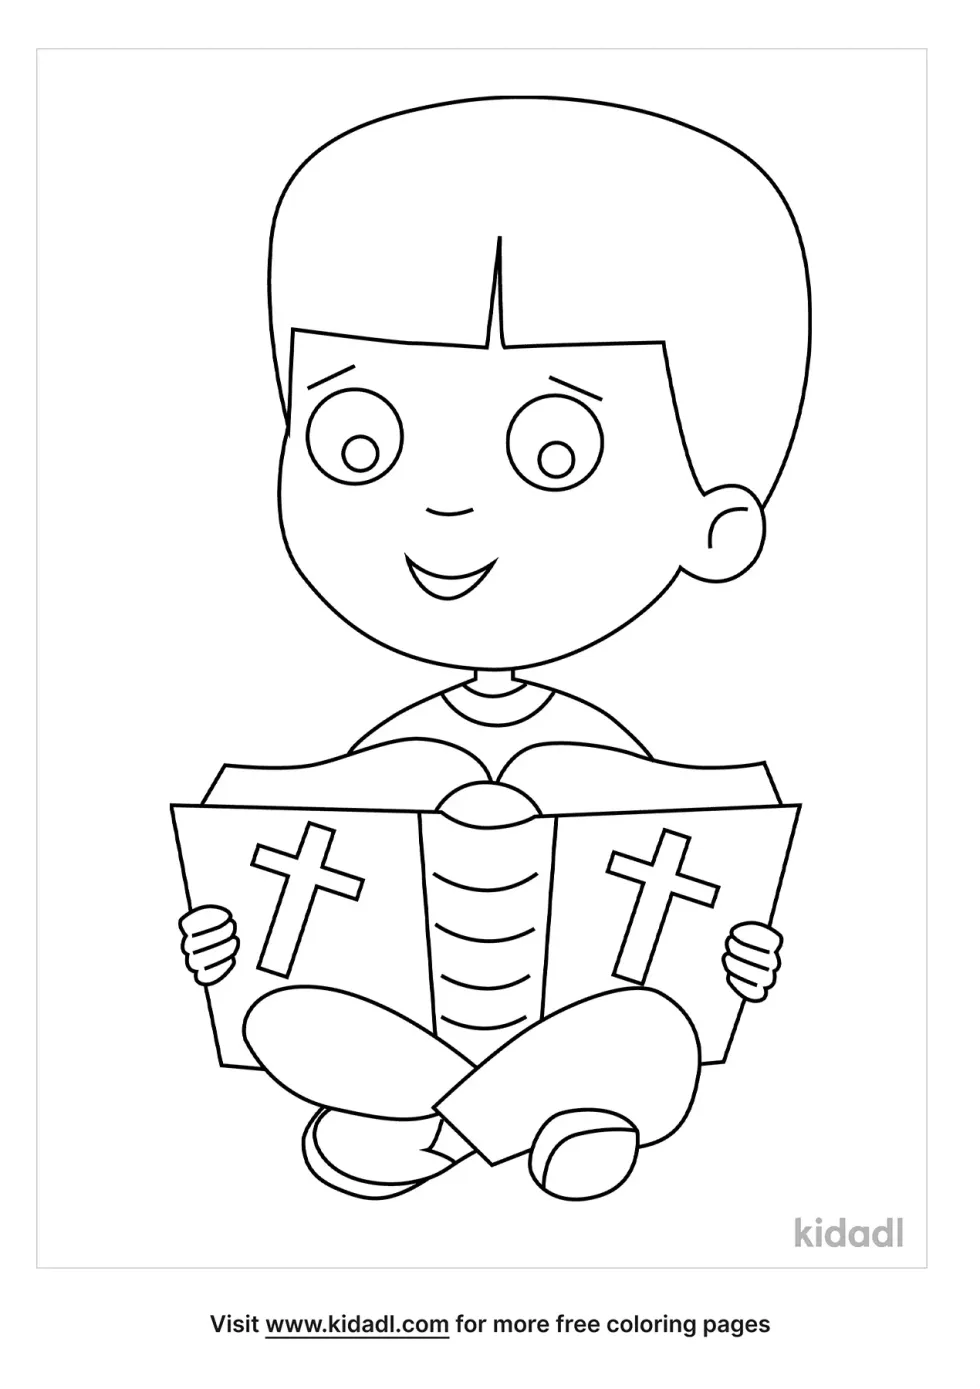 Child Holding A Bible